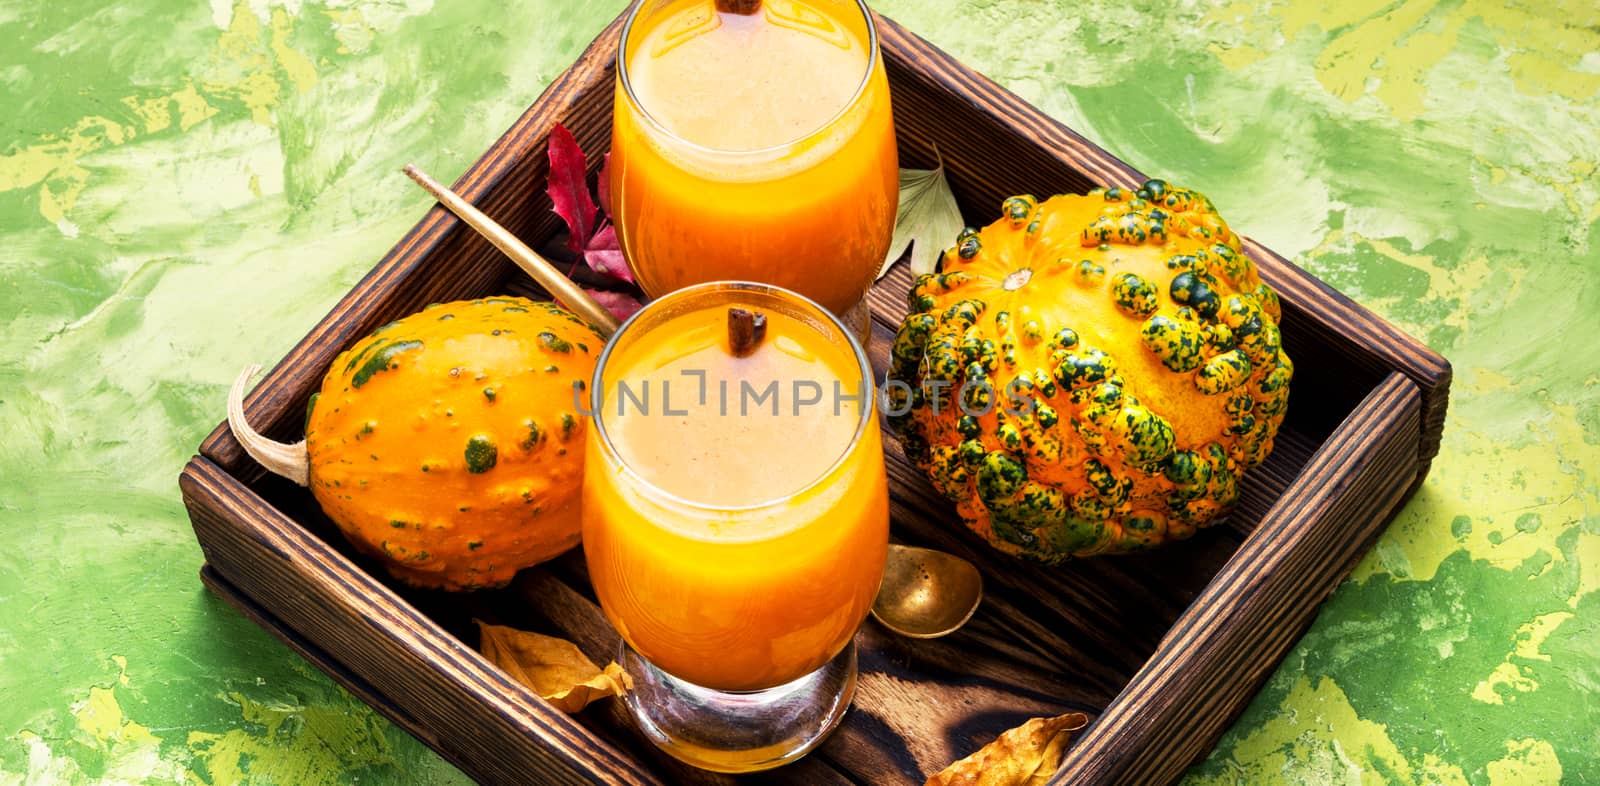 Pumpkin smoothie in glass on vintage table.Autumn drink.